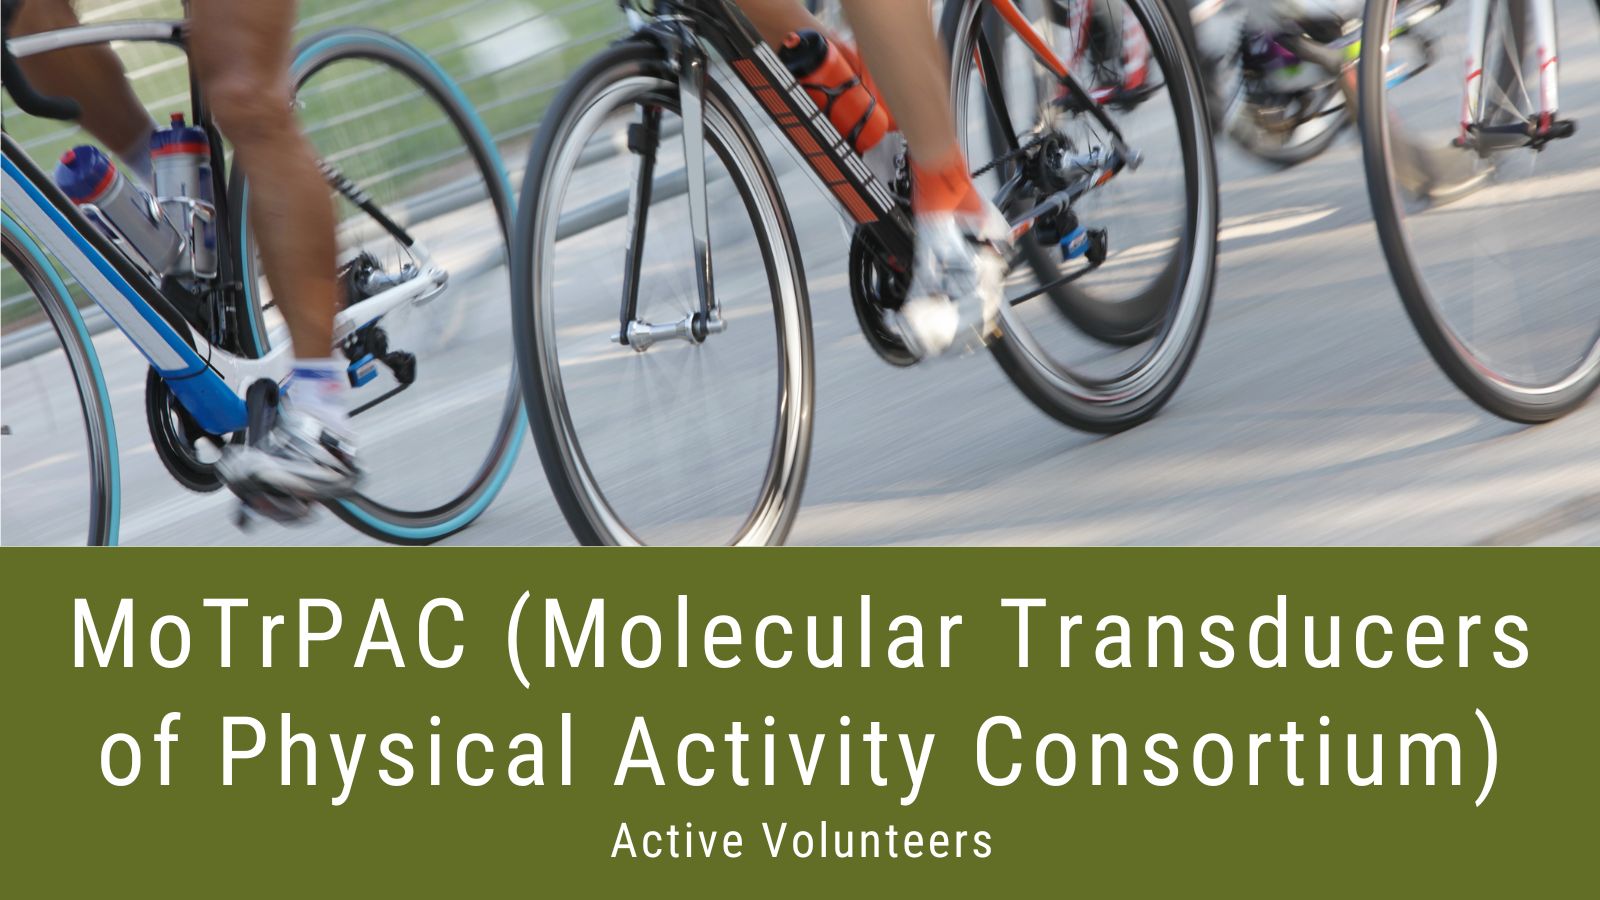 photo of bicycles racing, MoTrPAC (Molecular Transducers of Physical Activity Consortium) Active Volunteers